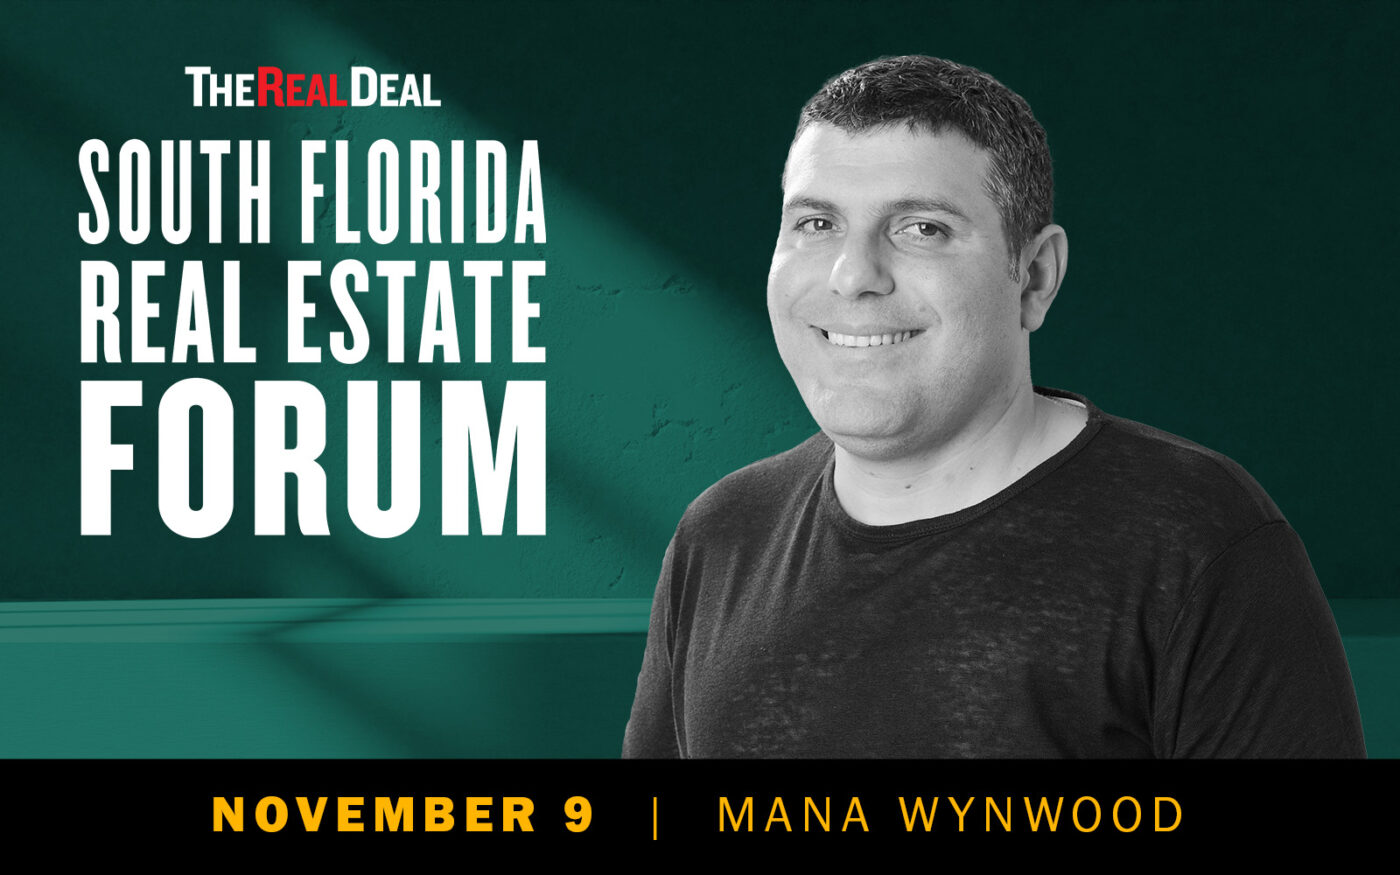 Teddy Sagi Joins The Real Deal’s Forum Lineup